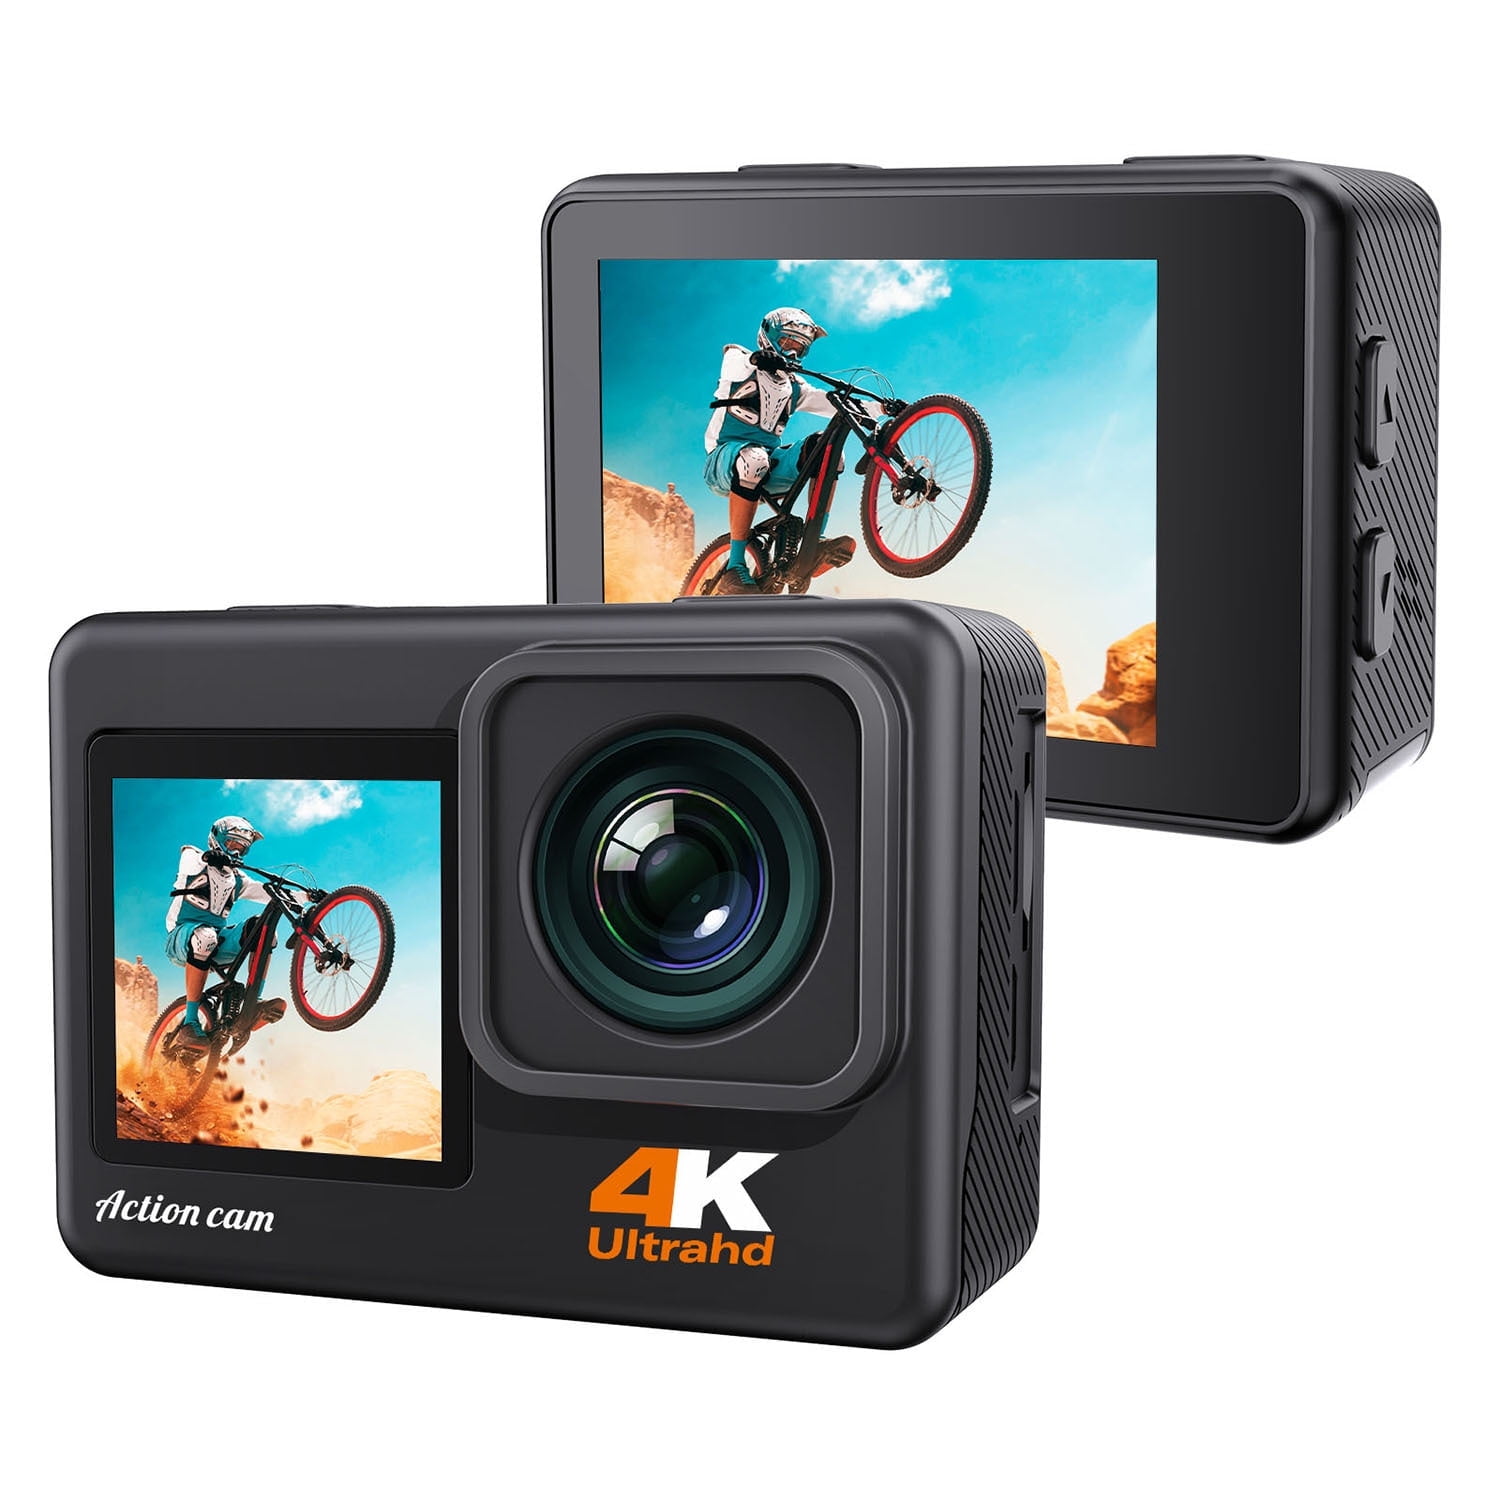 Sports Action Video Cameras D5 6400 Megapixel HD WiFi Digital Camera 4K  Dual Lens Professional Camcorder with 3inch IPS Display 16X Zoom DSLR f  231117